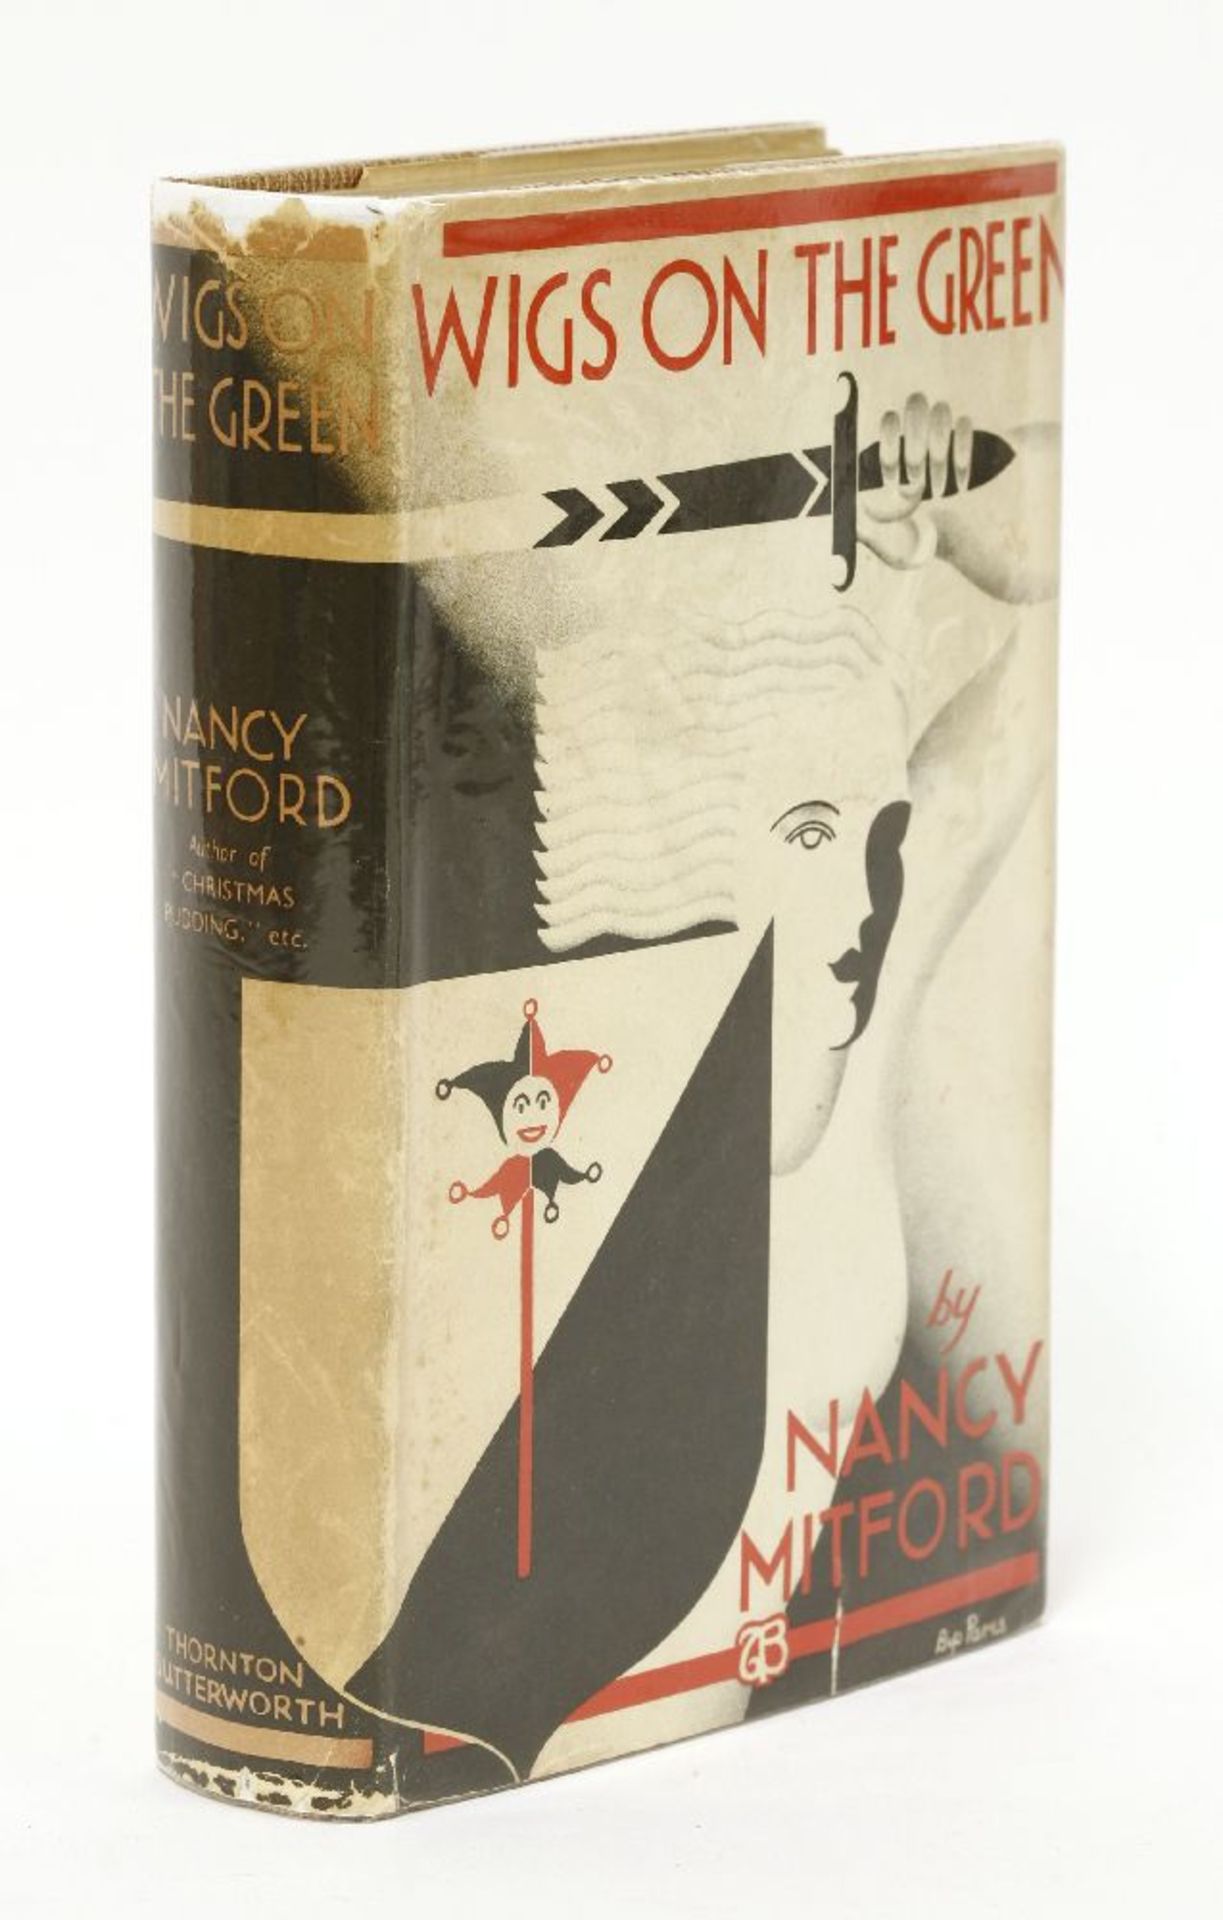 MITFORD, Nancy: Wigs on the Green. Thornton Butterworth 1935, First edition, First impression,